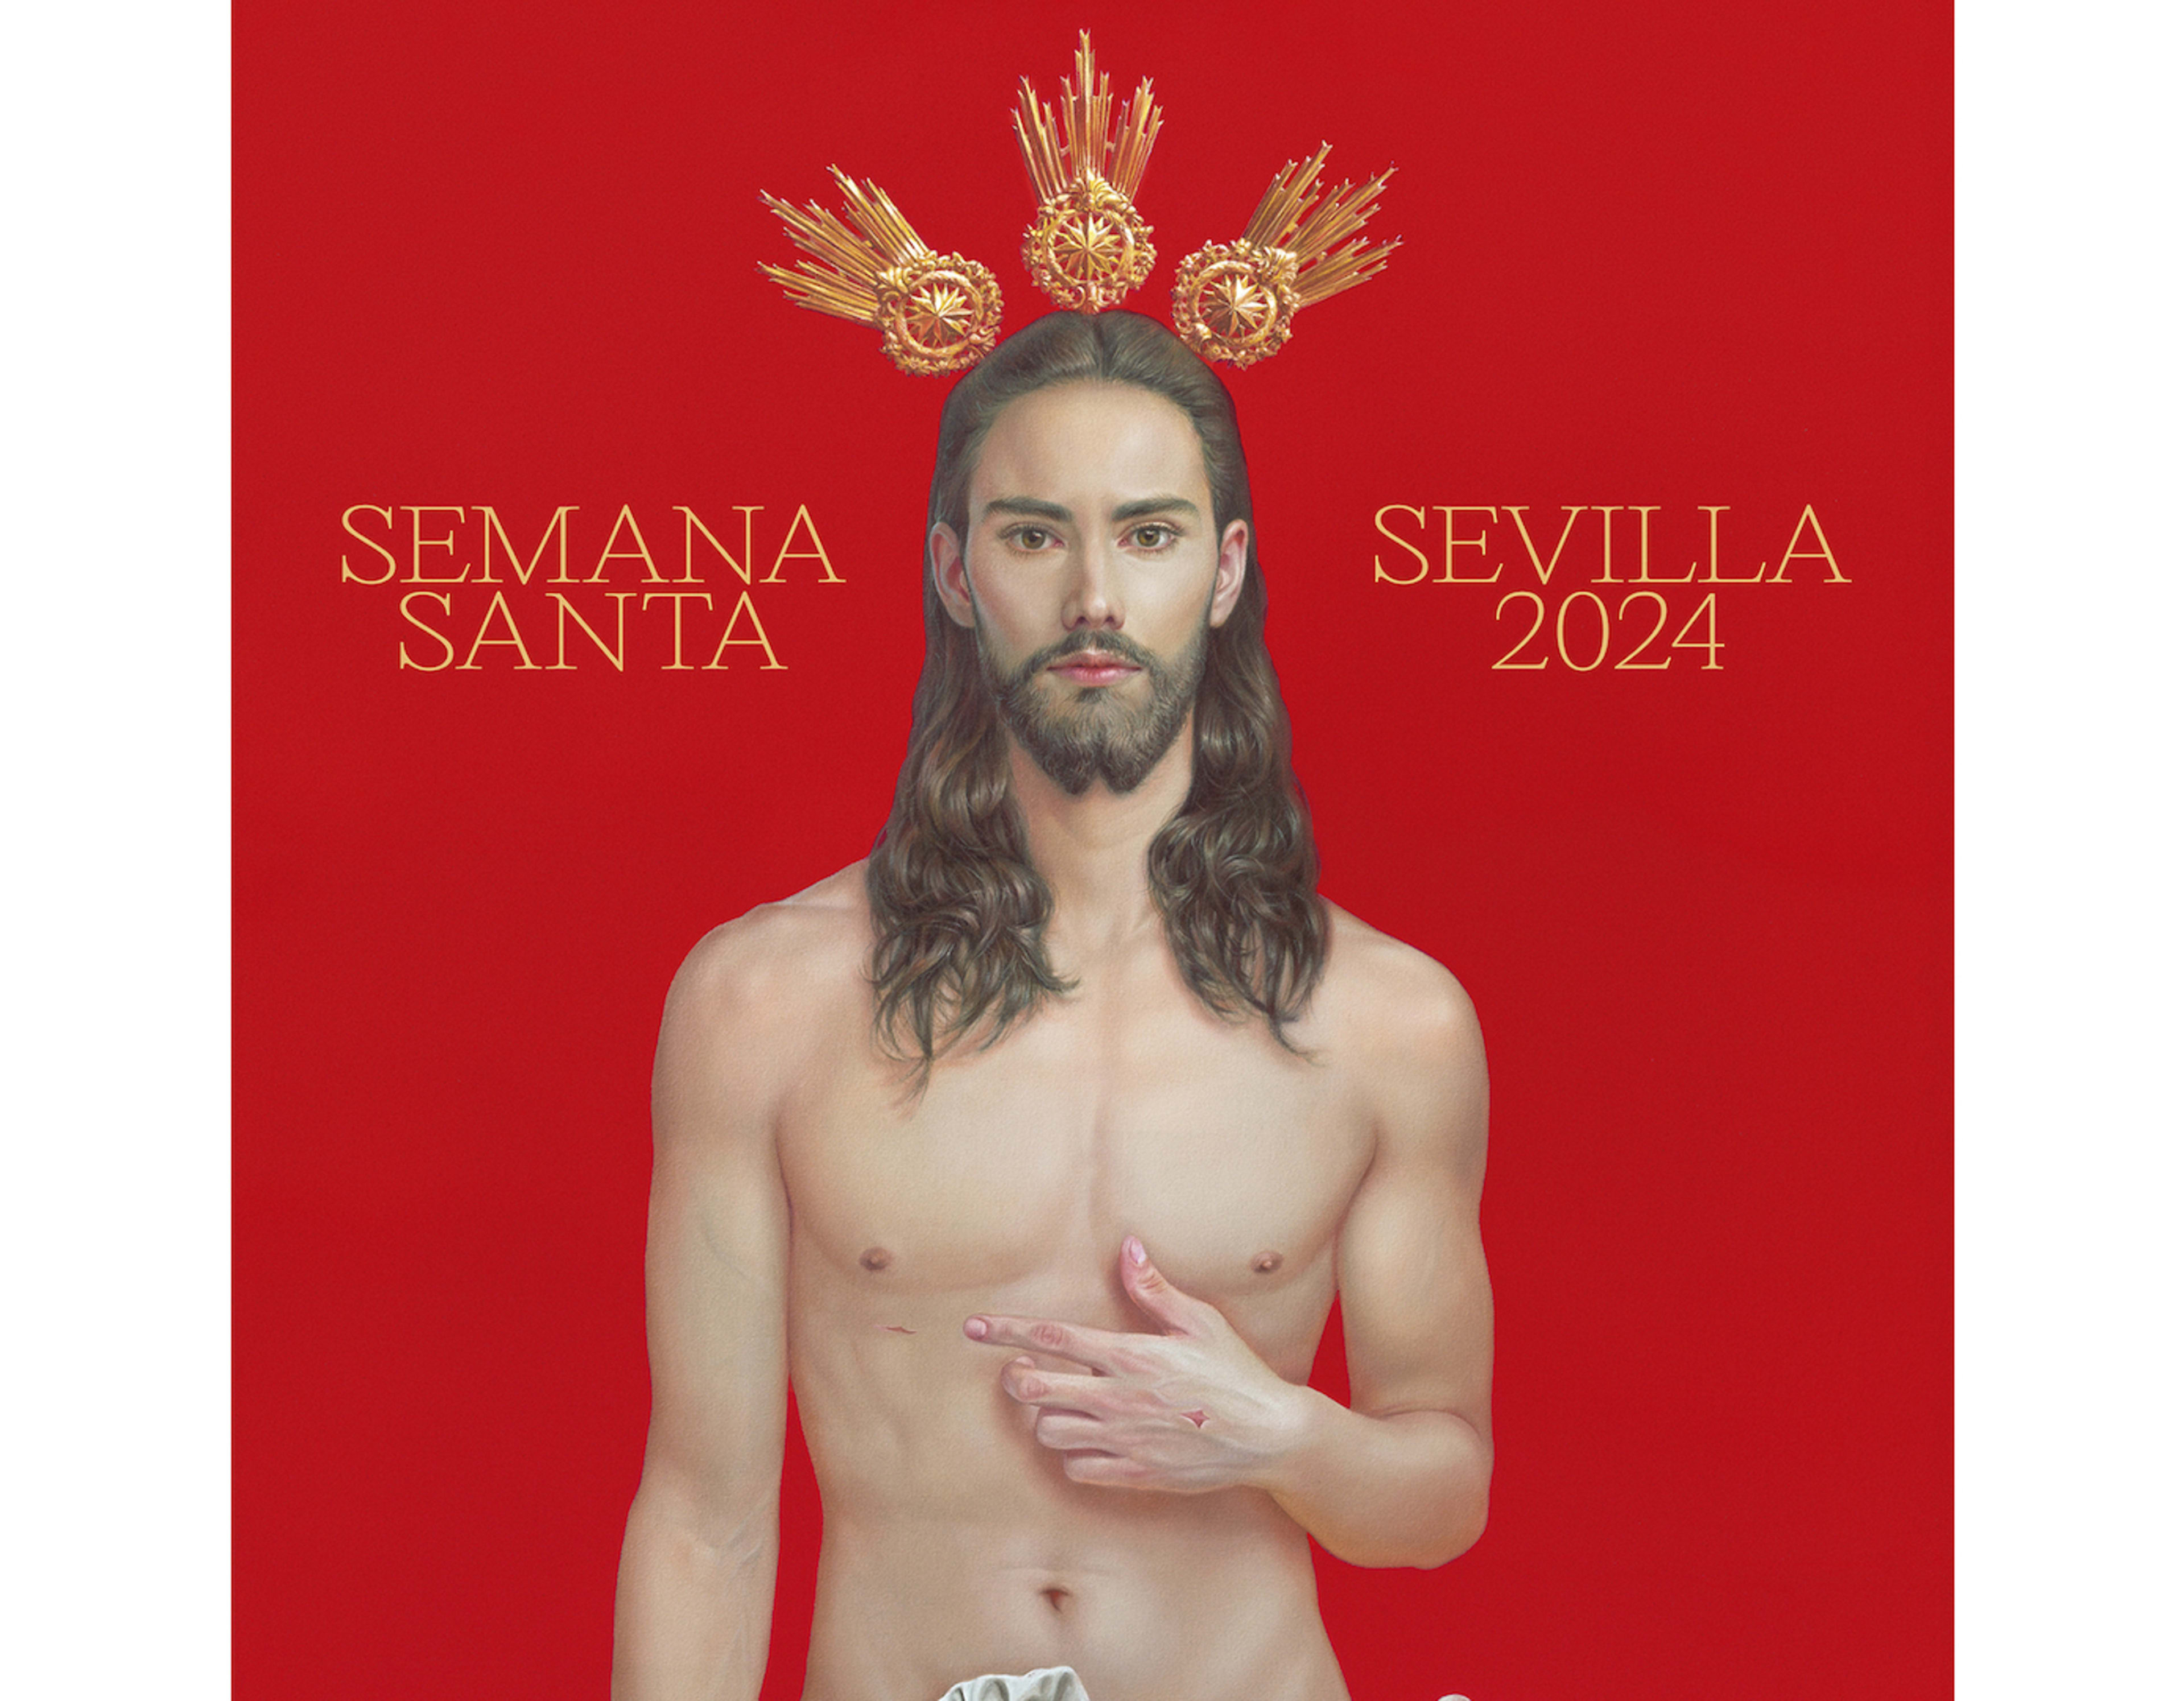 The poster by internationally recognized Seville artist Salustiano Garcia Cruz depicts a young, handsome, fit and fresh-faced Jesus